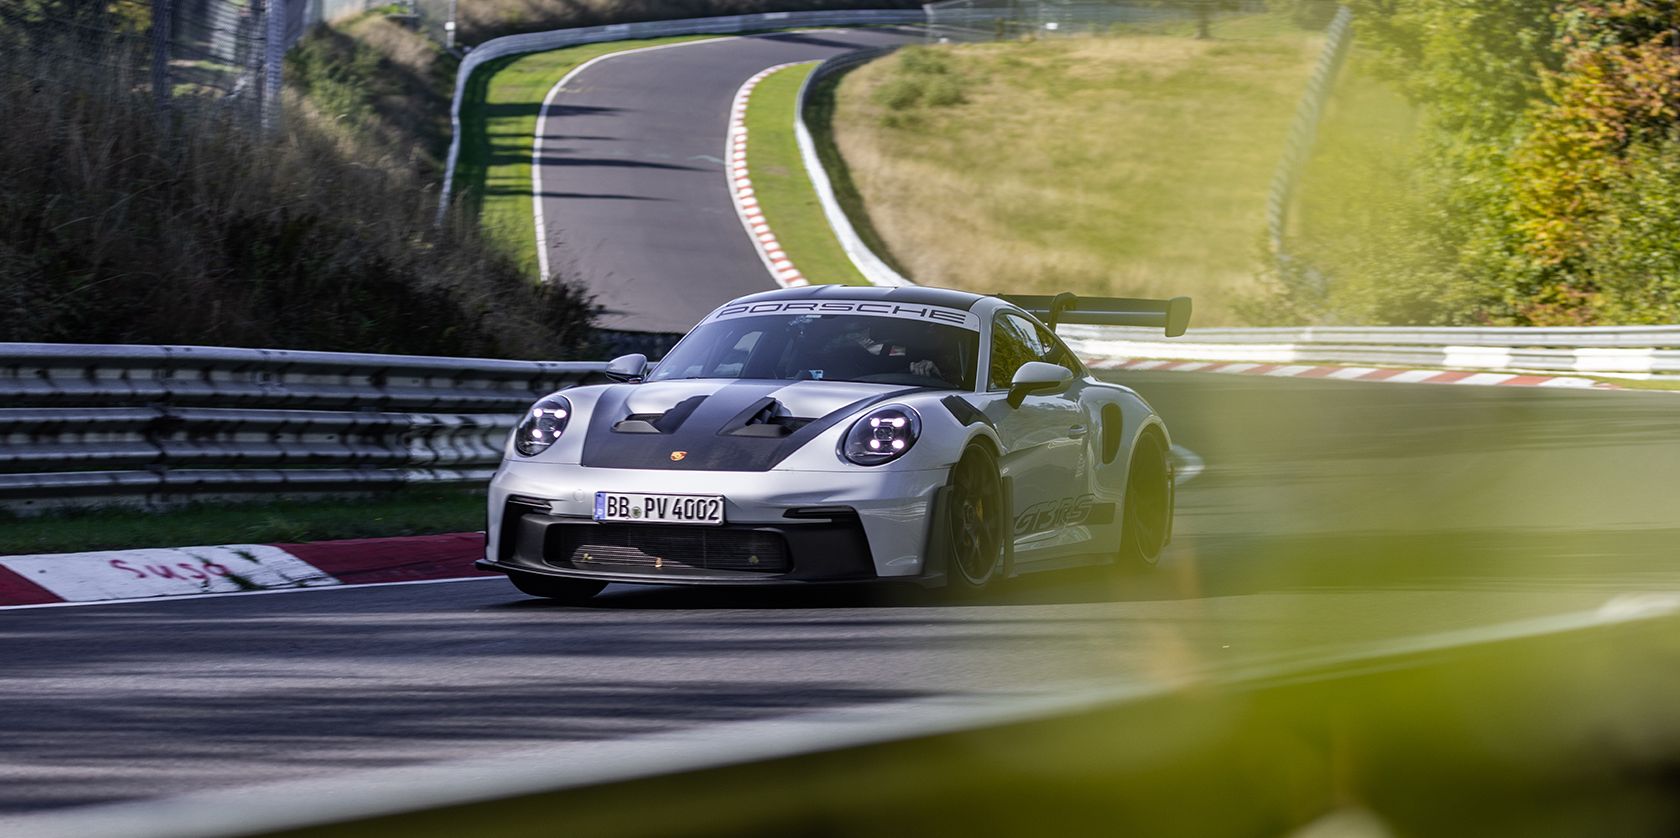 The 2023 Porsche 911 GT3 RS Laps the Nürburgring Faster Than the Old GT2 RS